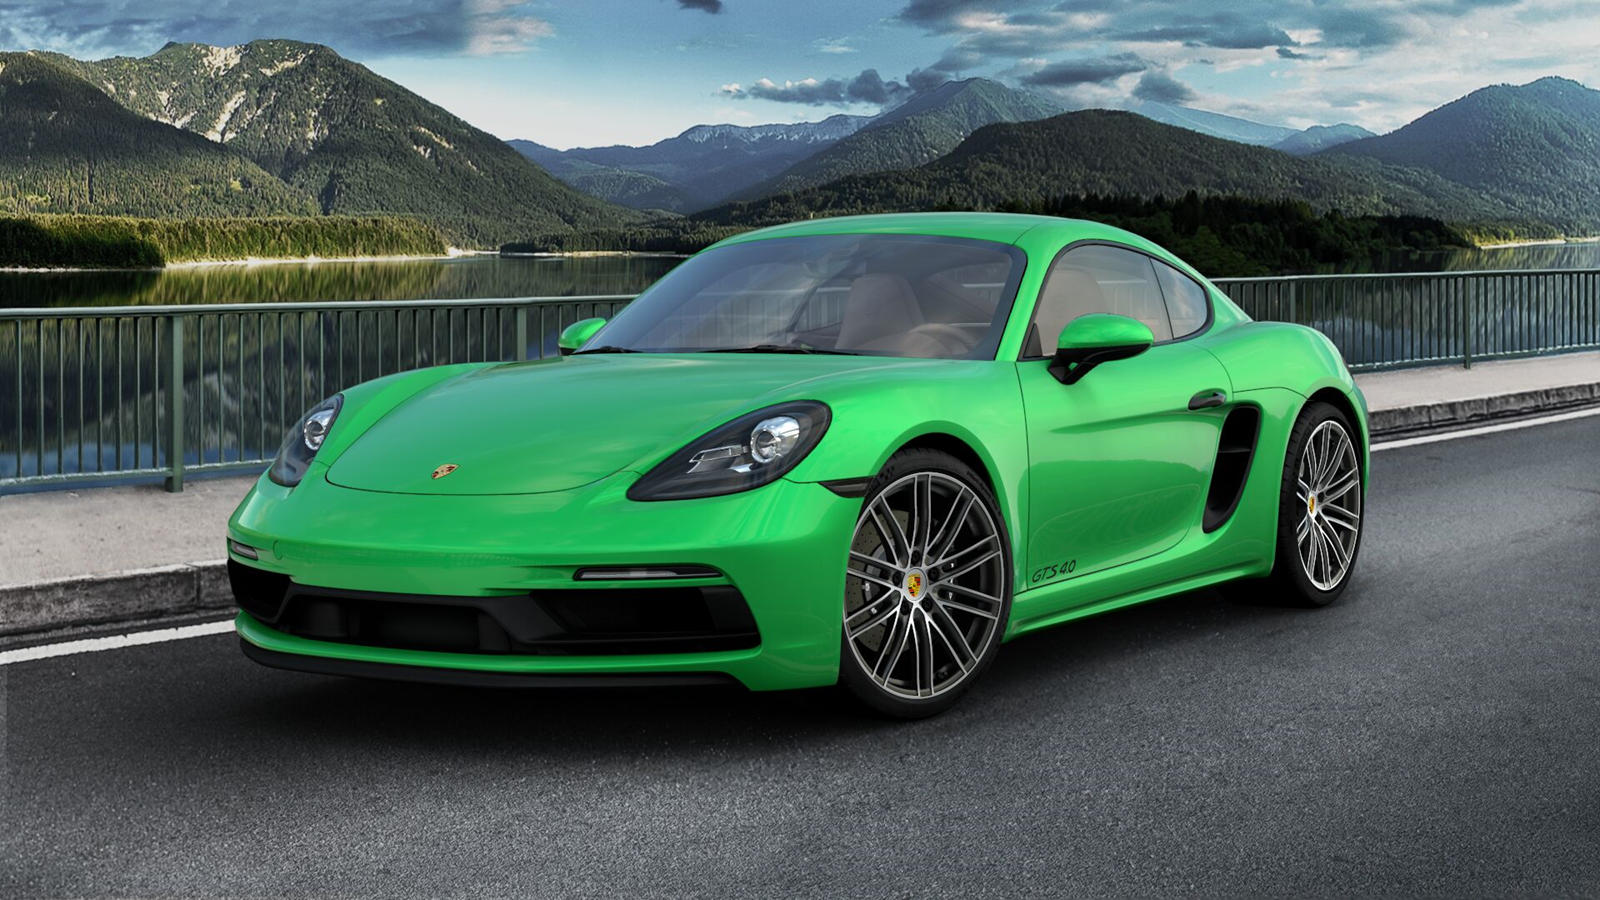 photo of Most Expensive Porsche Cayman GTS Costs 911 Turbo Money image